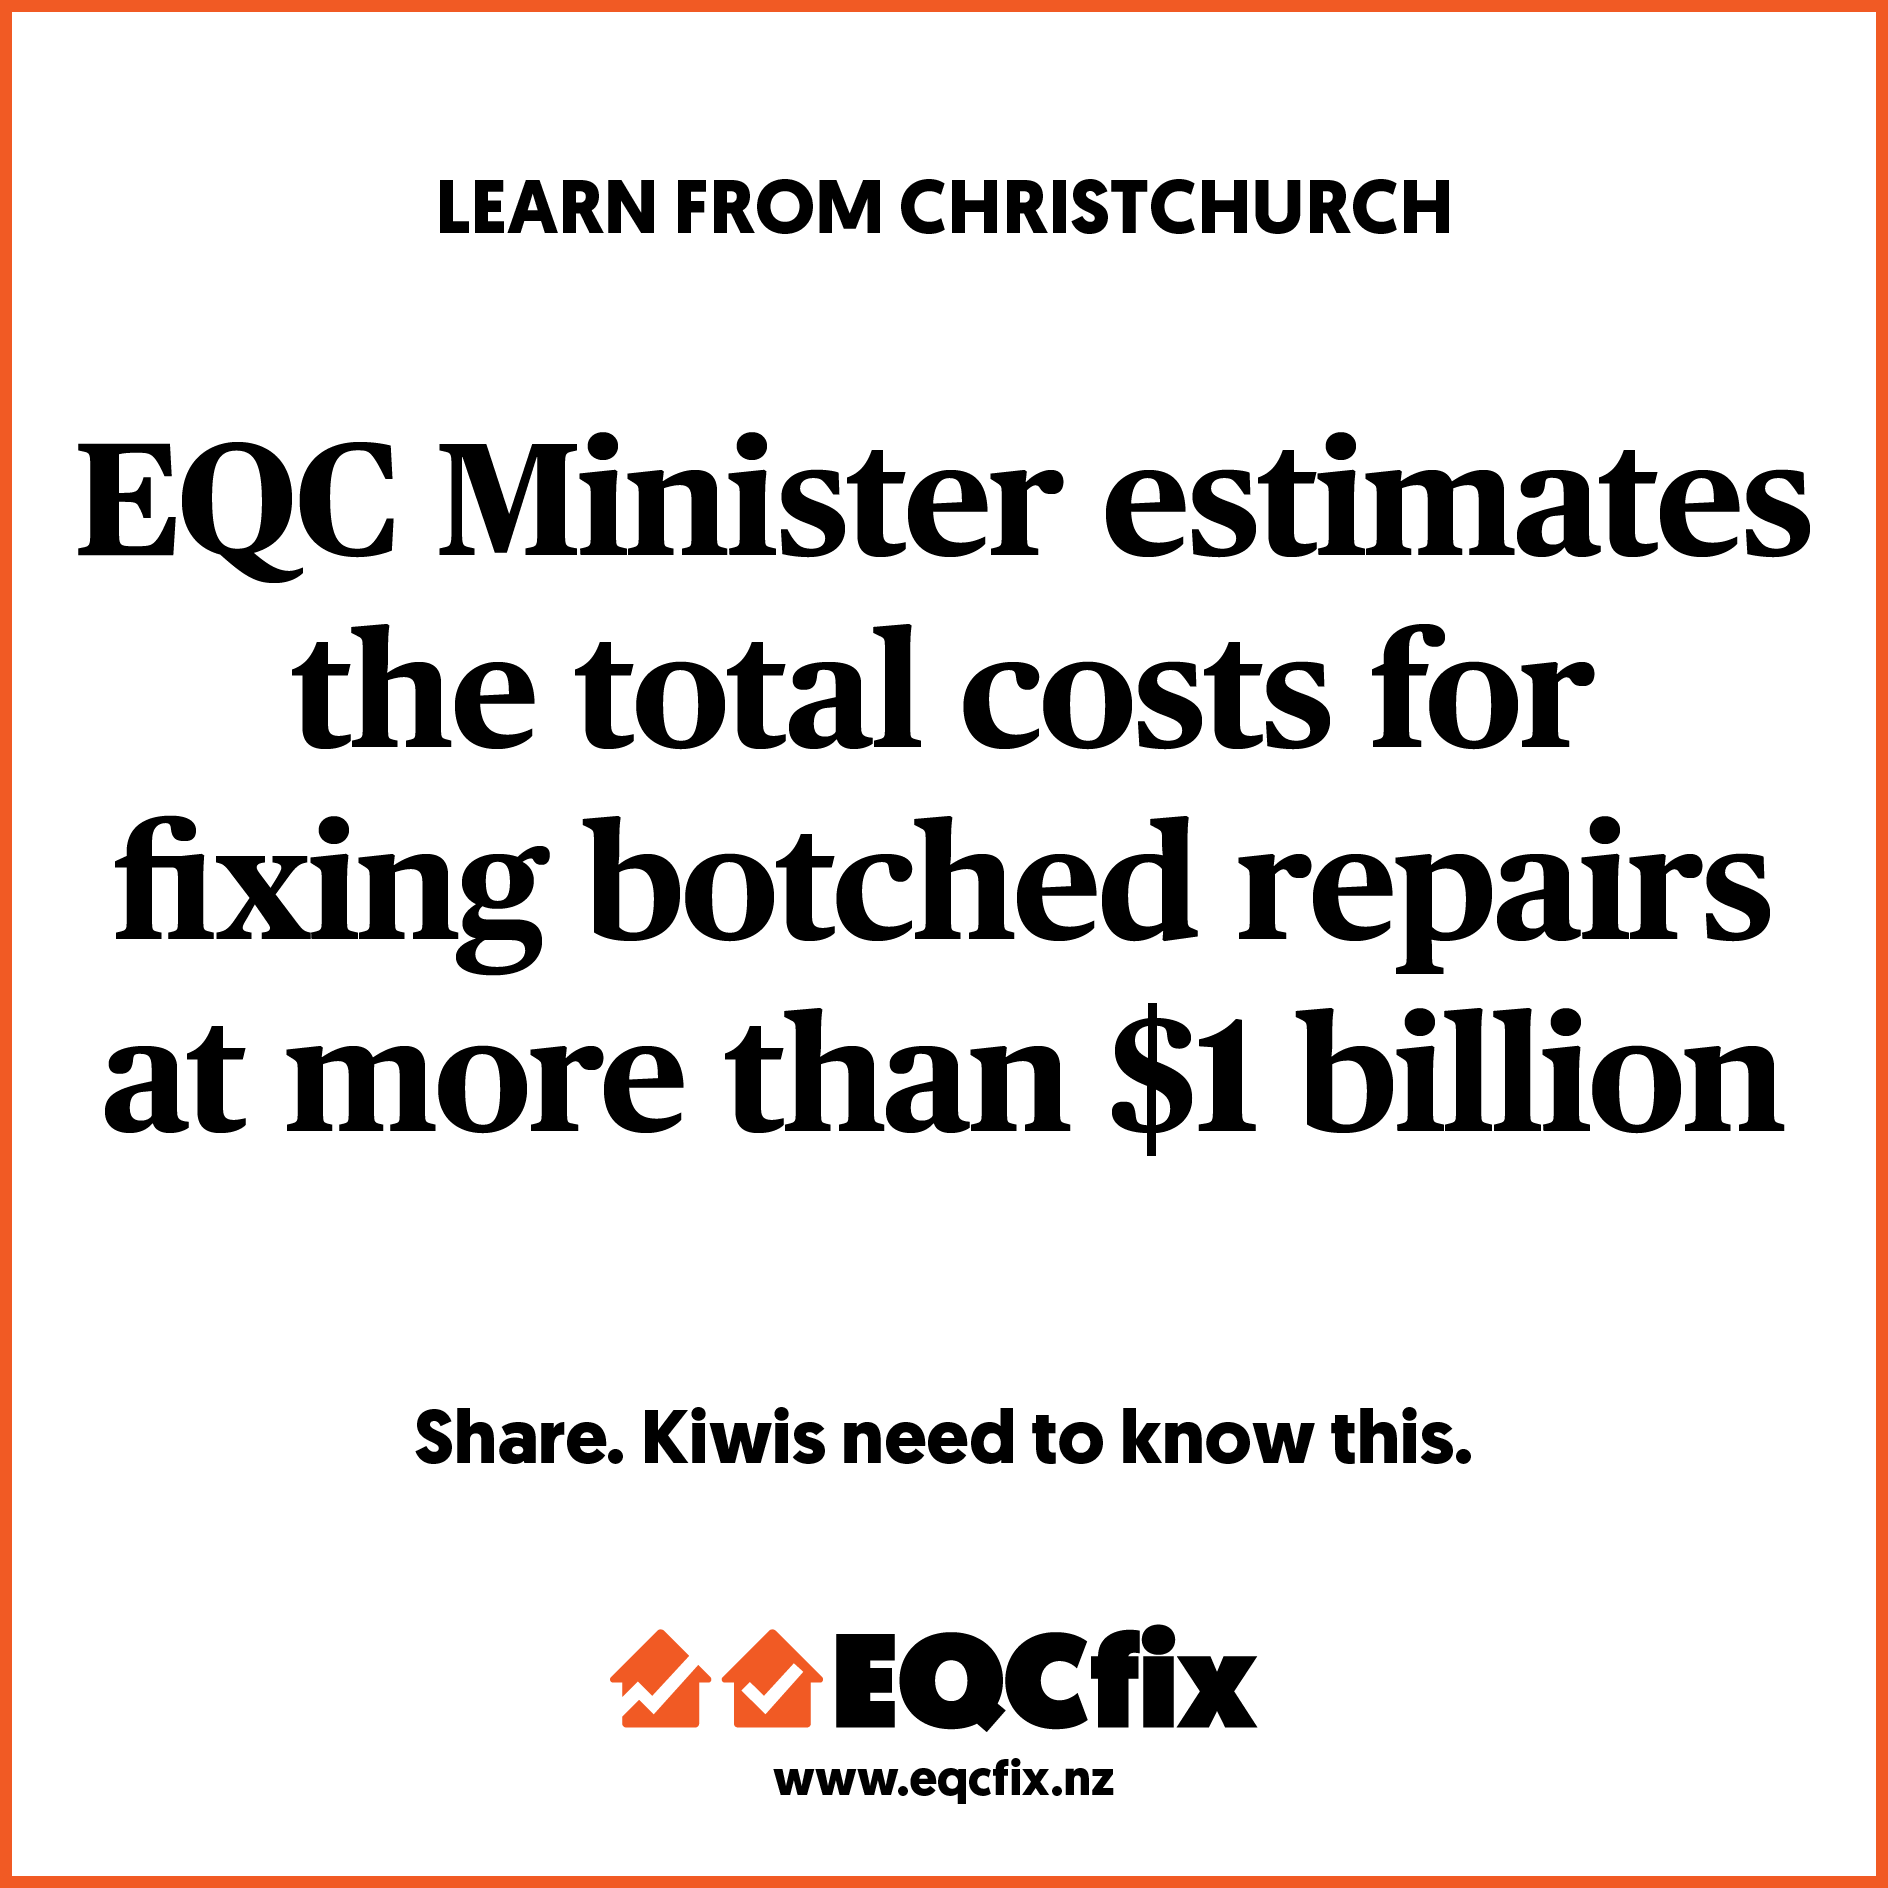 TOTAL COSTS FOR BOTCHED REPAIRS MORE THAN $1 BILLION?